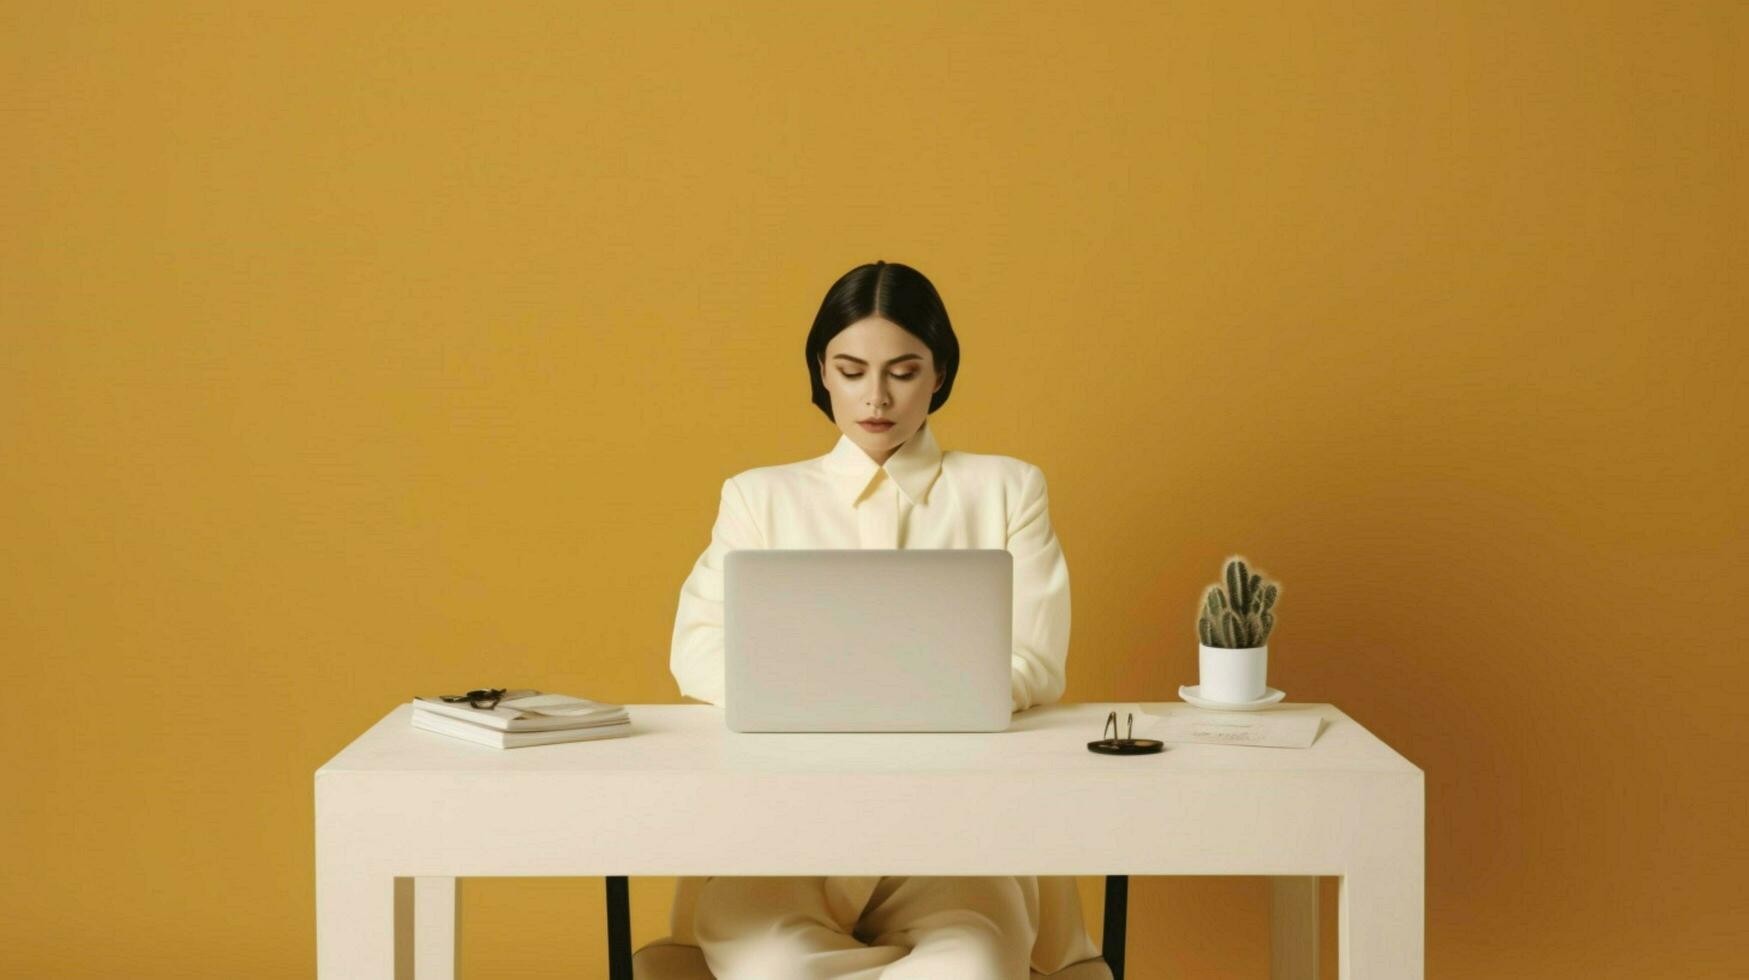 a woman in a white suit is sitting at a desk and photo